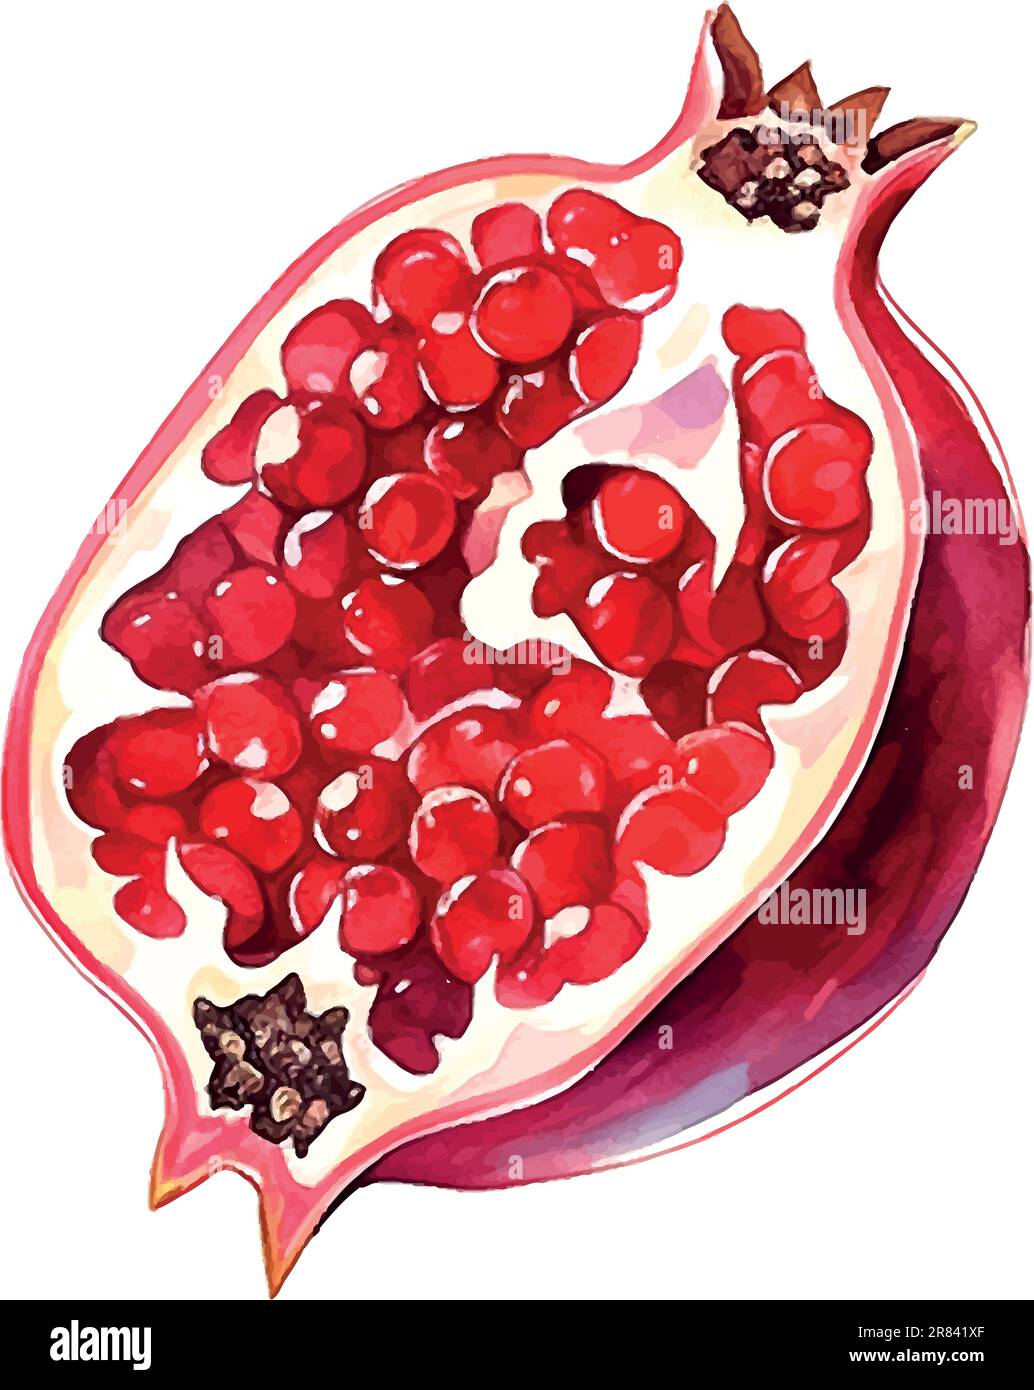 26,287 Pomegranate Drawing Images, Stock Photos & Vectors | Shutterstock